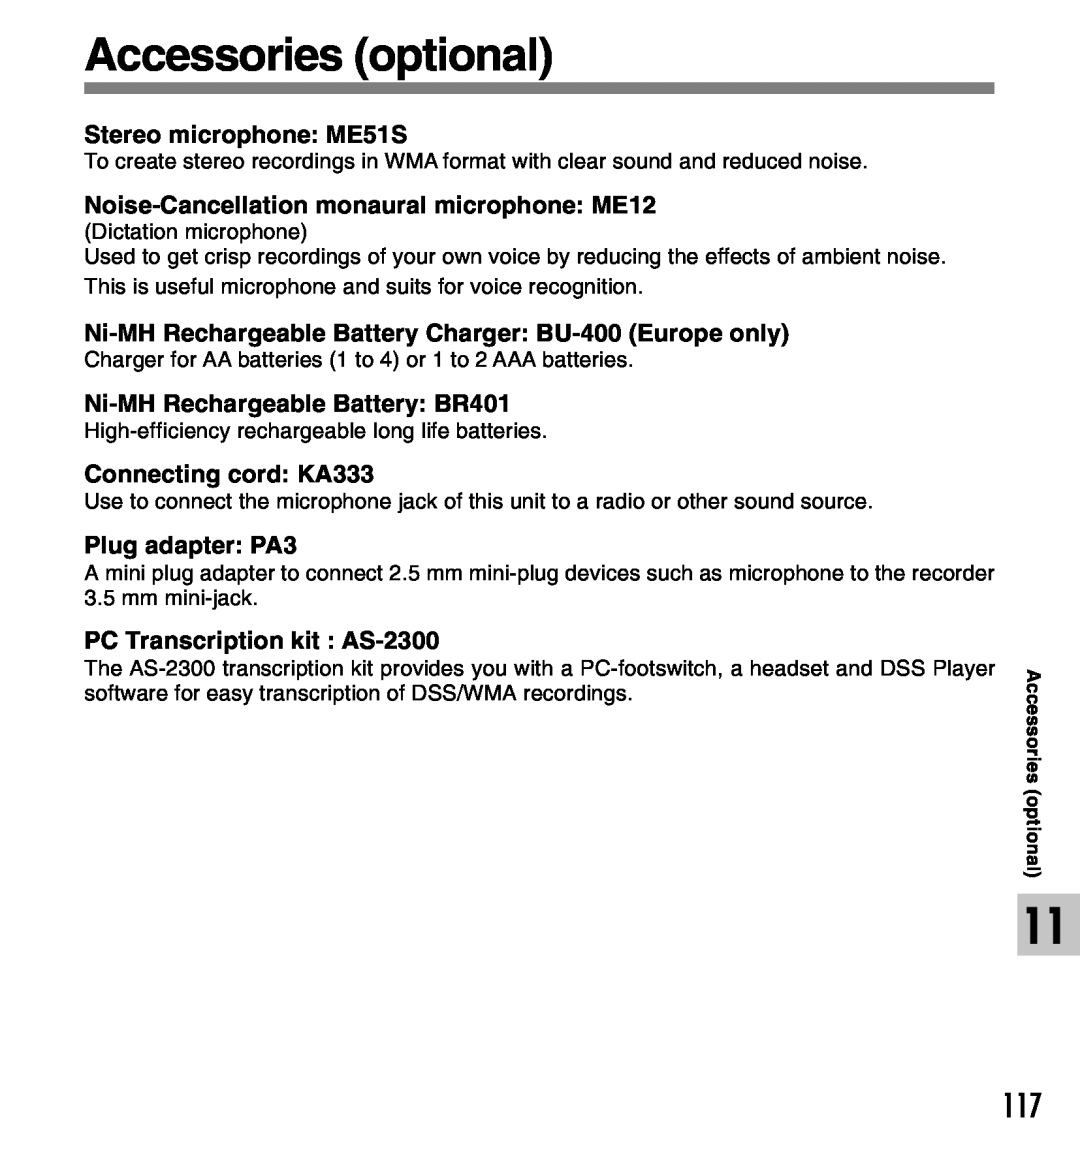 Olympus Accessories optional, Stereo microphone ME51S, Noise-Cancellation monaural microphone ME12, Plug adapter PA3 